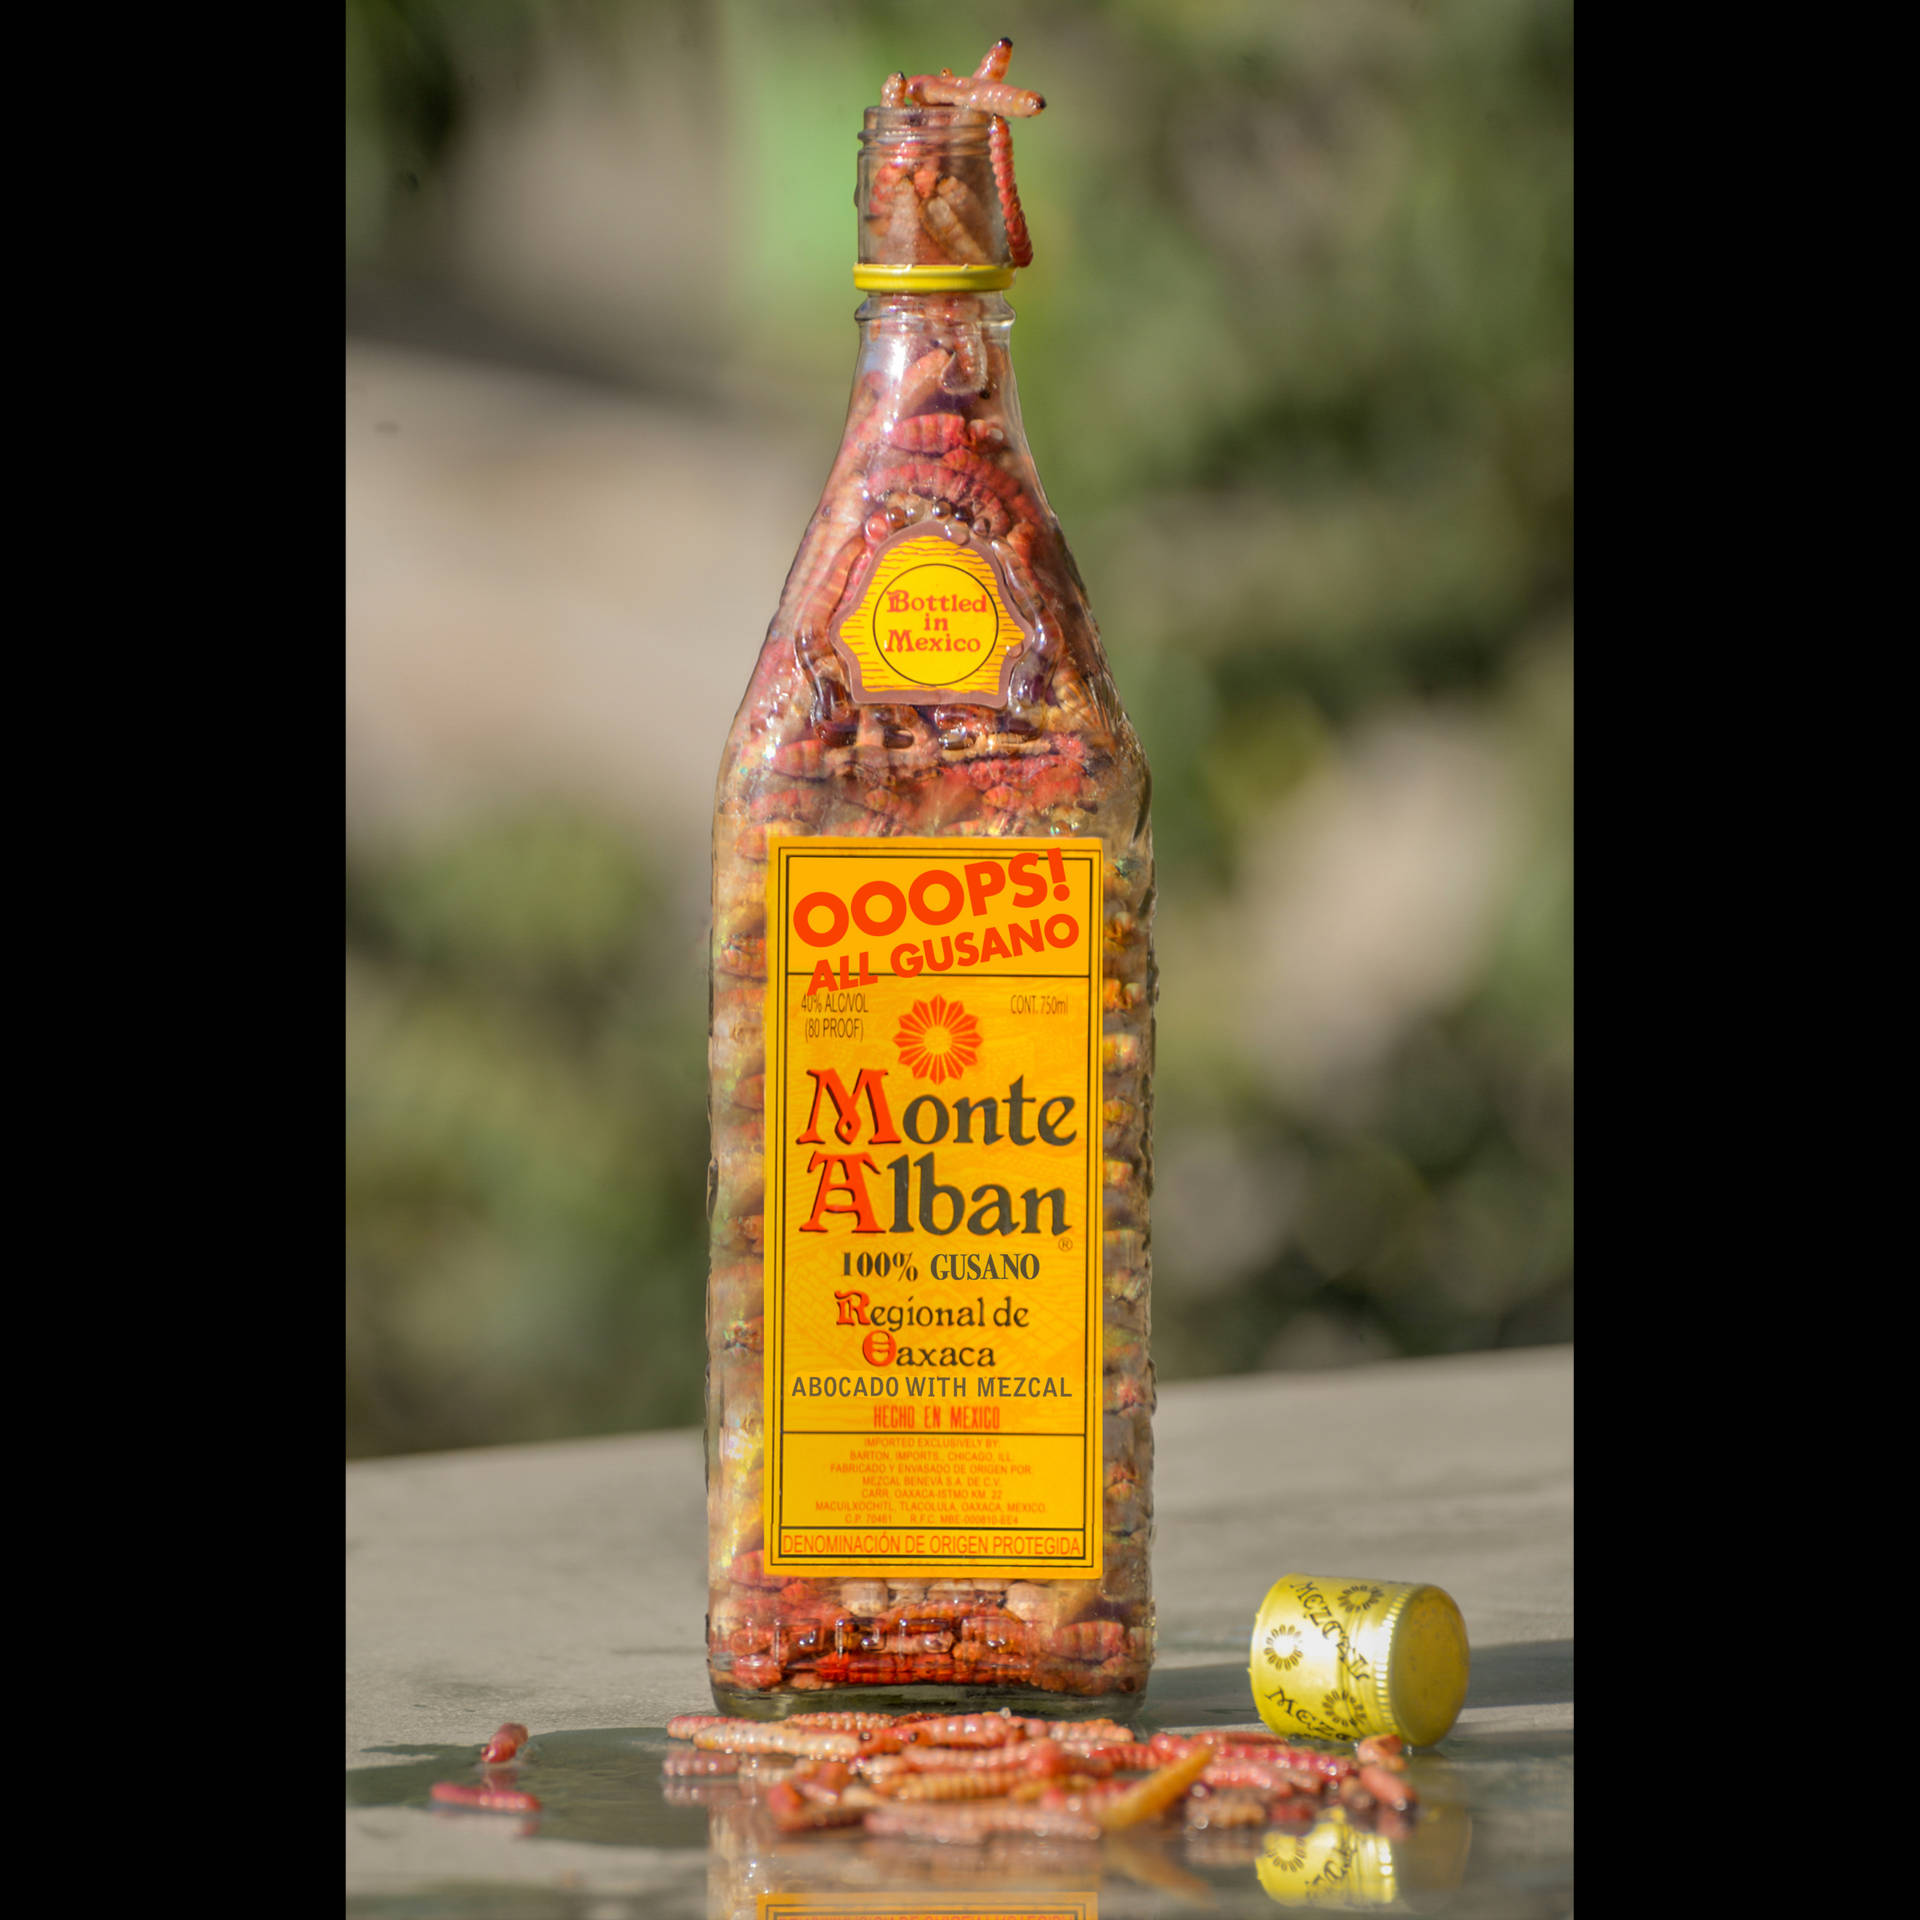 Monte Alban Mezcal Filled With Gusano Worms Wallpaper